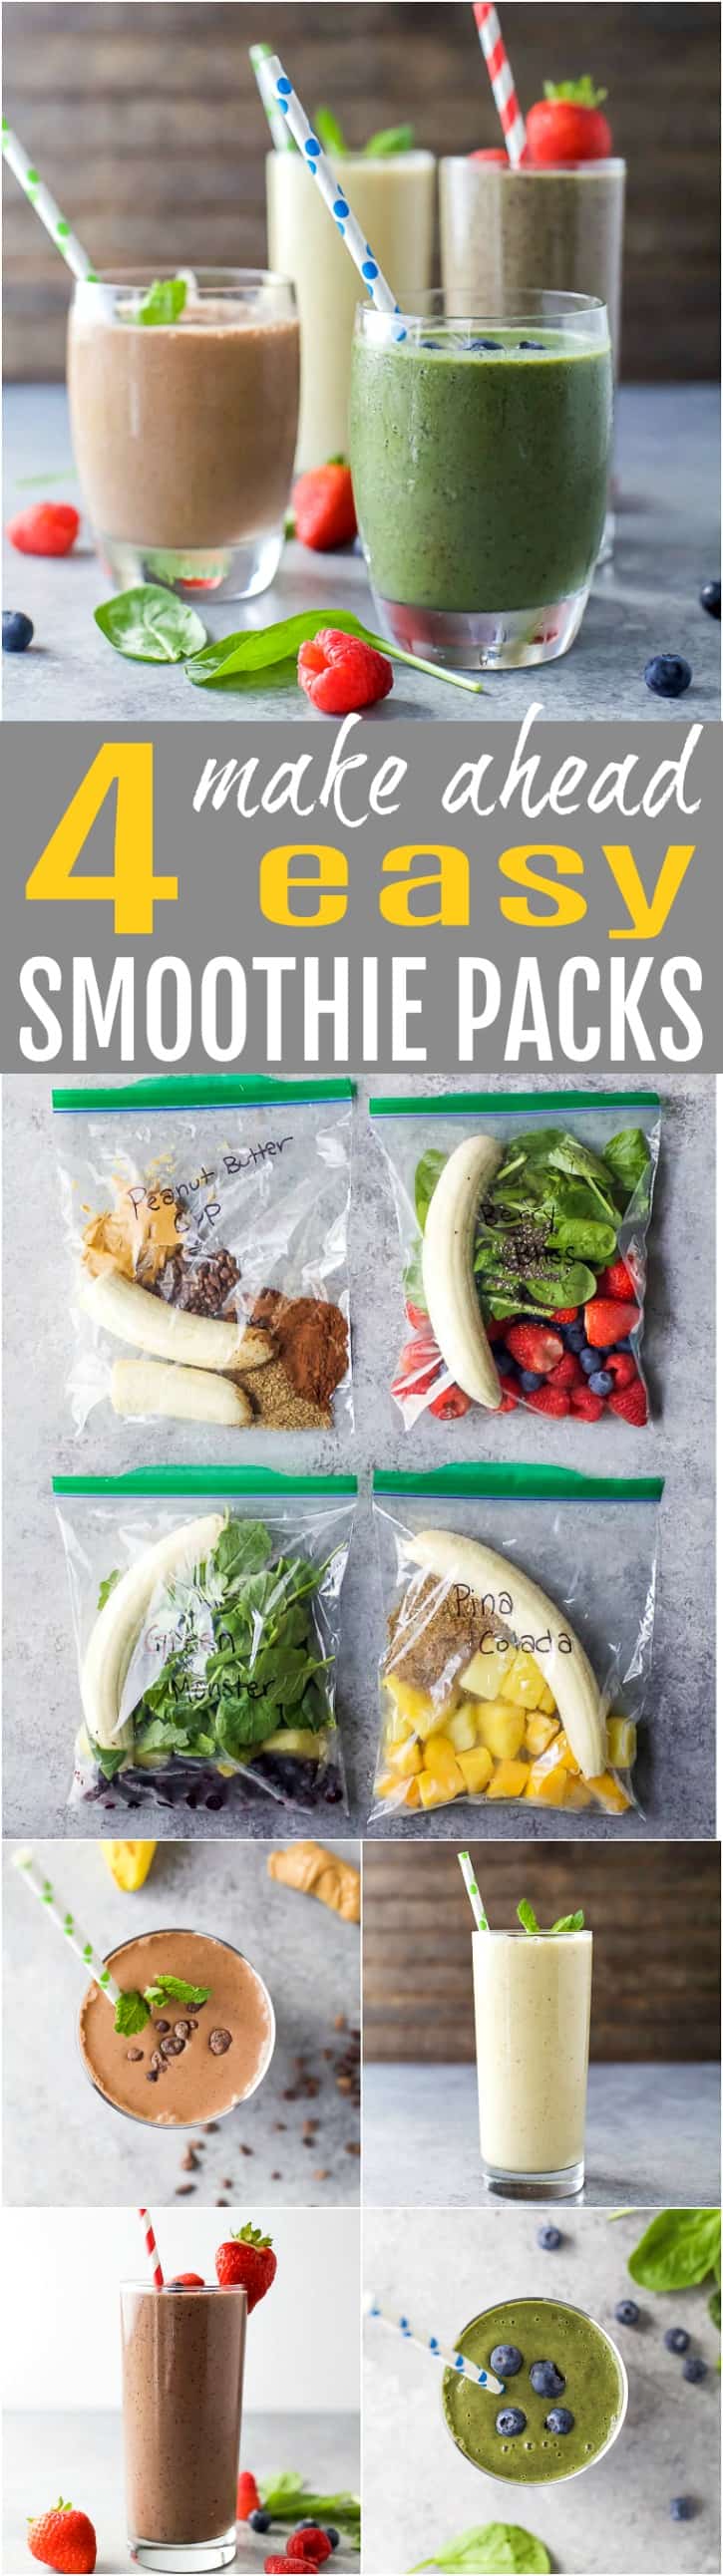 4 Easy Smoothie Packs Recipes that can be made ahead and frozen for quick use! Each smoothie is loaded with nutrients, protein and fiber. Plus are kid approved. These smoothie packs are the perfect start to a healthy new year!